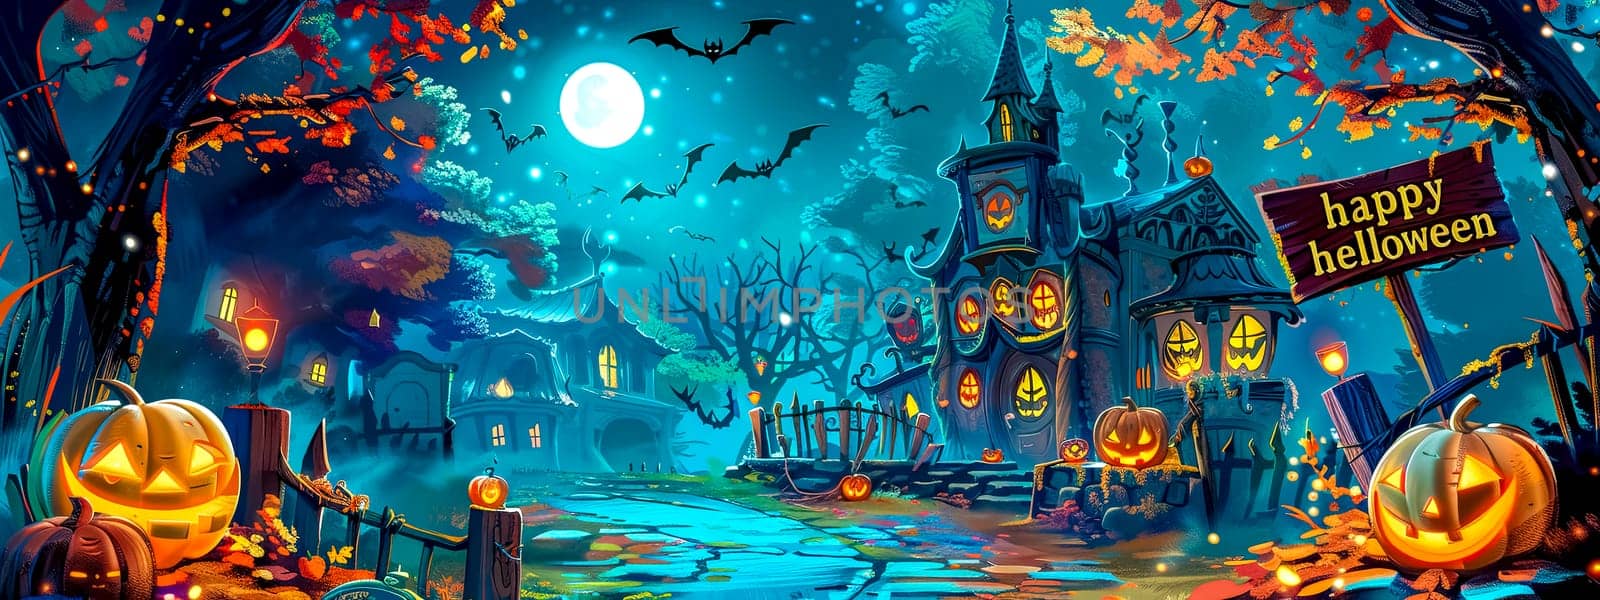 Vibrant illustration of a spooky halloween setting with haunted house and pumpkins by Edophoto